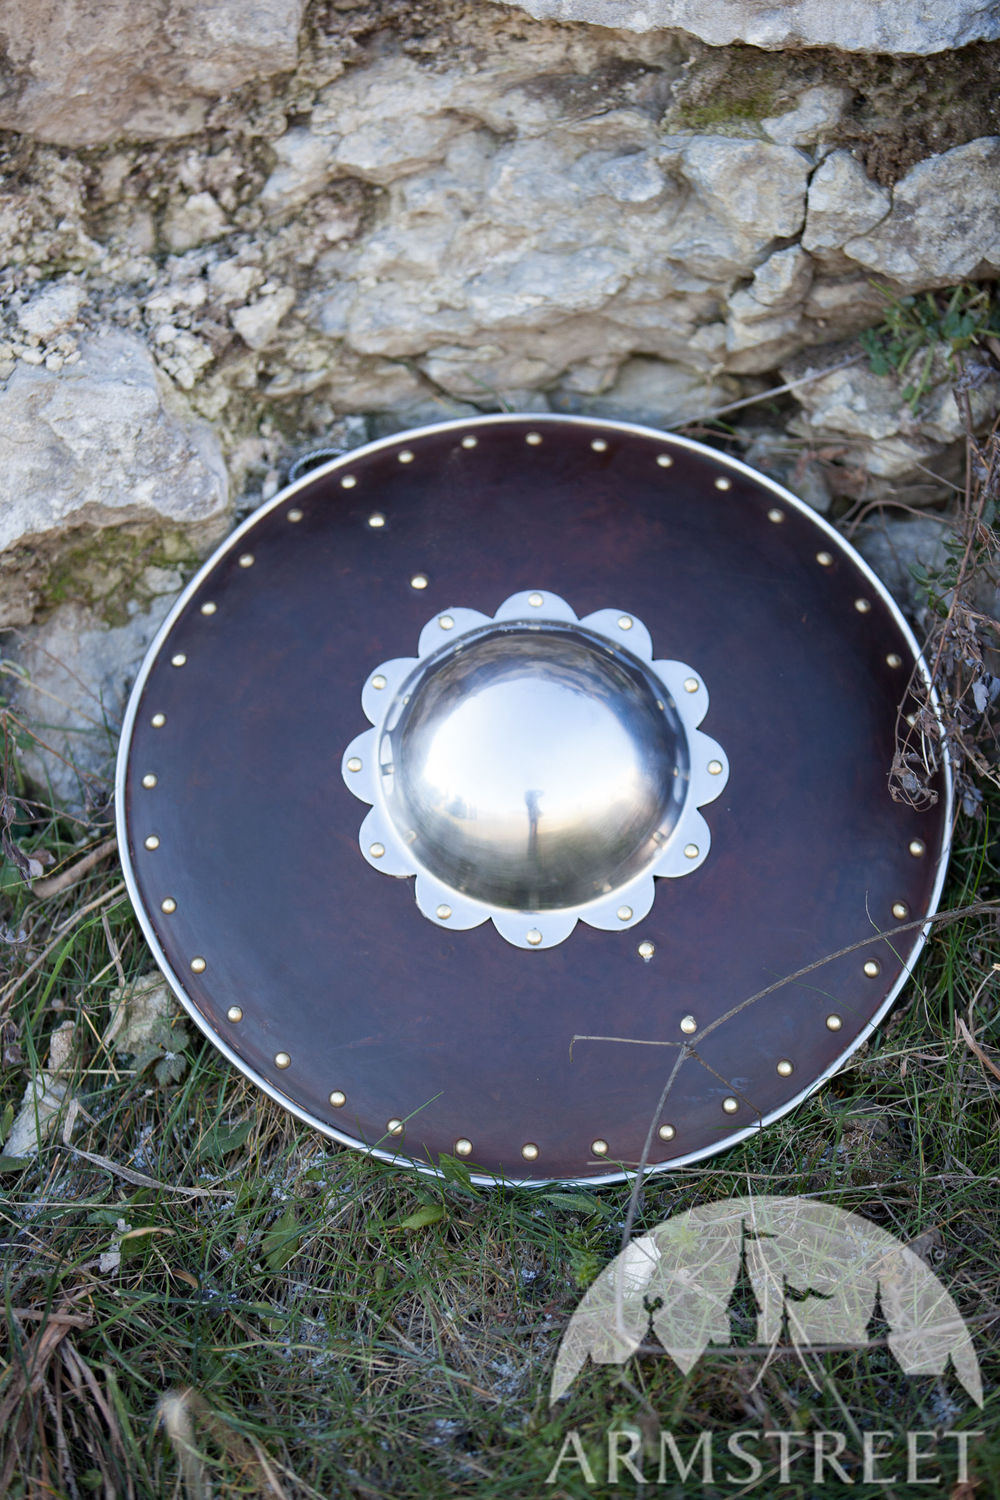 Leather Covered Buckler Shield “Hound Of War”